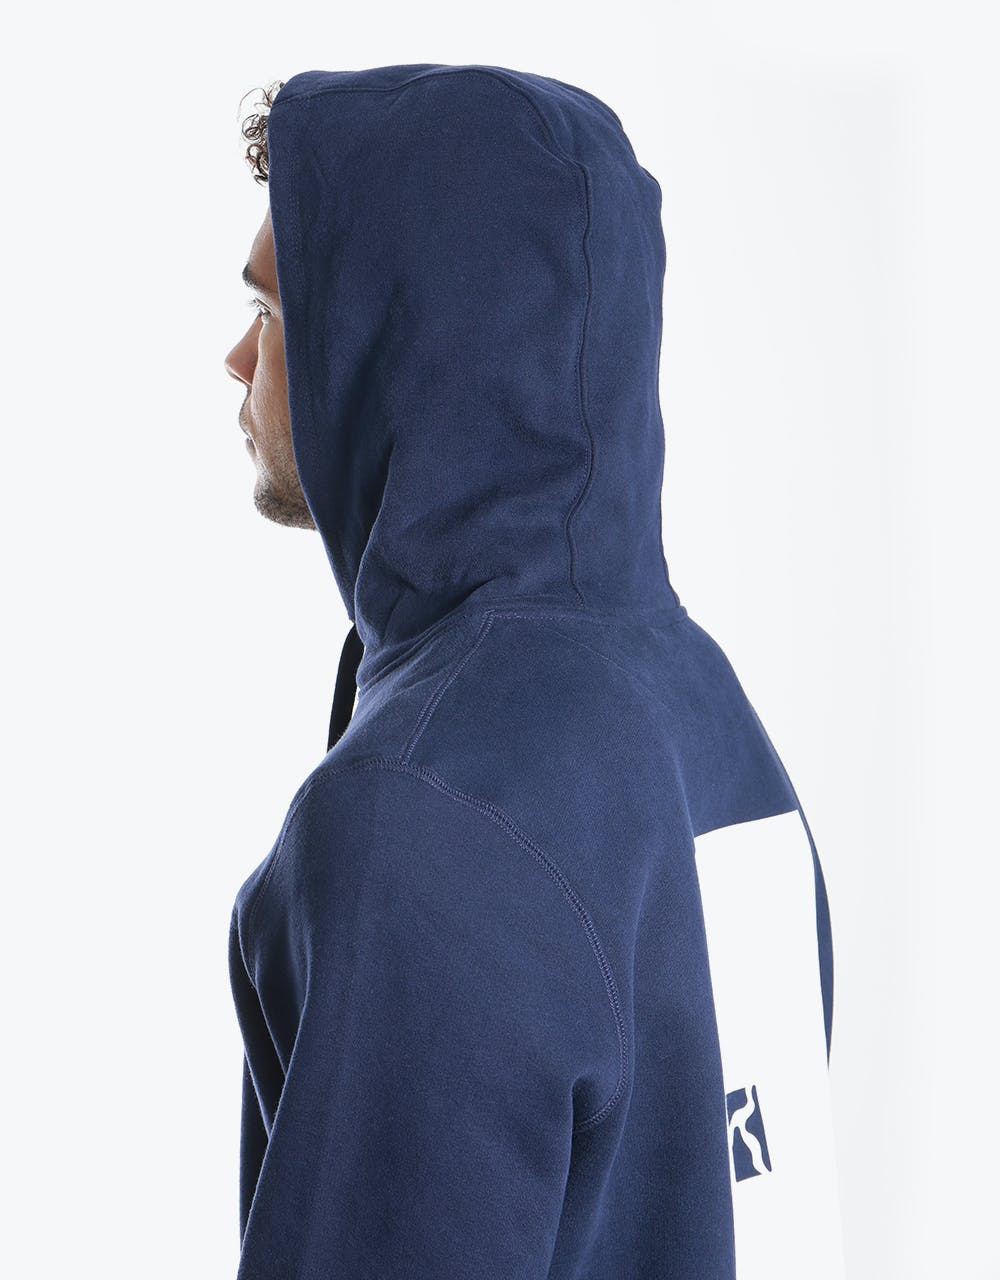 Poetic Collective Box Pullover Hoodie - Navy